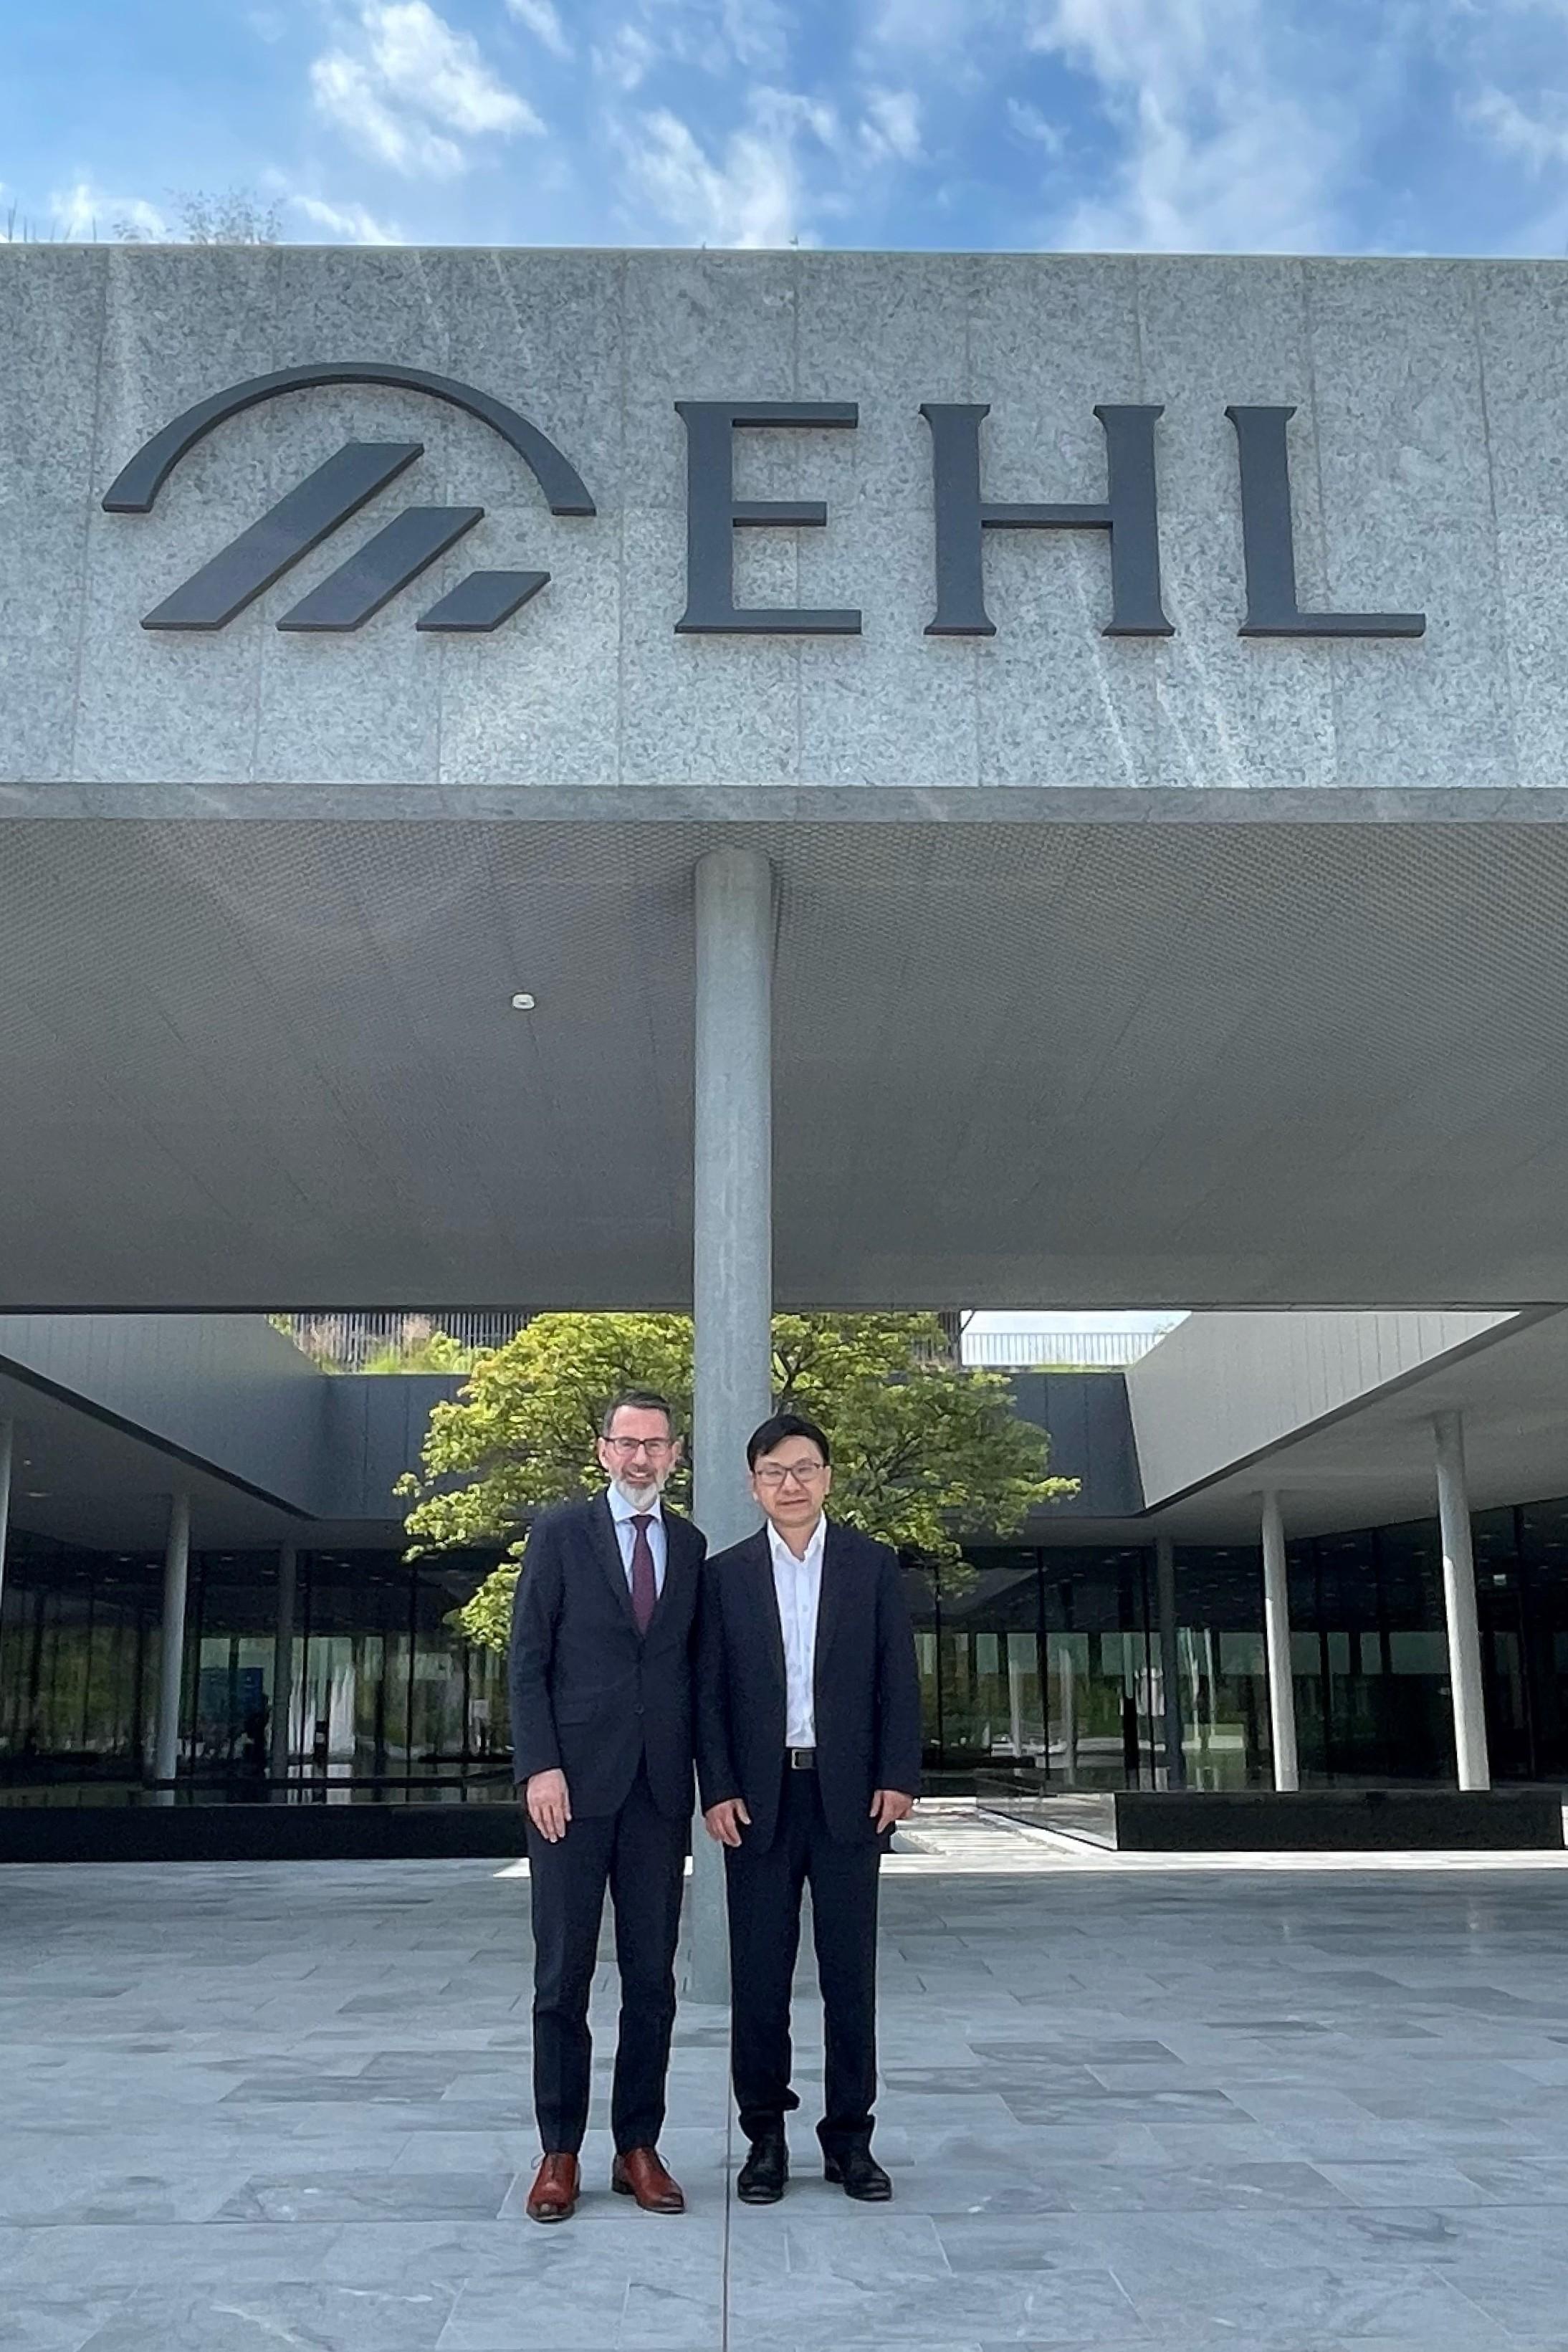 The Secretary for Labour and Welfare, Mr Chris Sun, arrived in Geneva, Switzerland, on June 8 (Geneva time) and started his visit. He was joined by the Commissioner for Labour, Ms May Chan. Photo shows Mr Sun (right), accompanied by the Chief Academic Officer of EHL Group, Dr Juan-Francisco Perellon (left), touring the campus facilities of EHL Hospitality Business School in Lausanne in that afternoon.